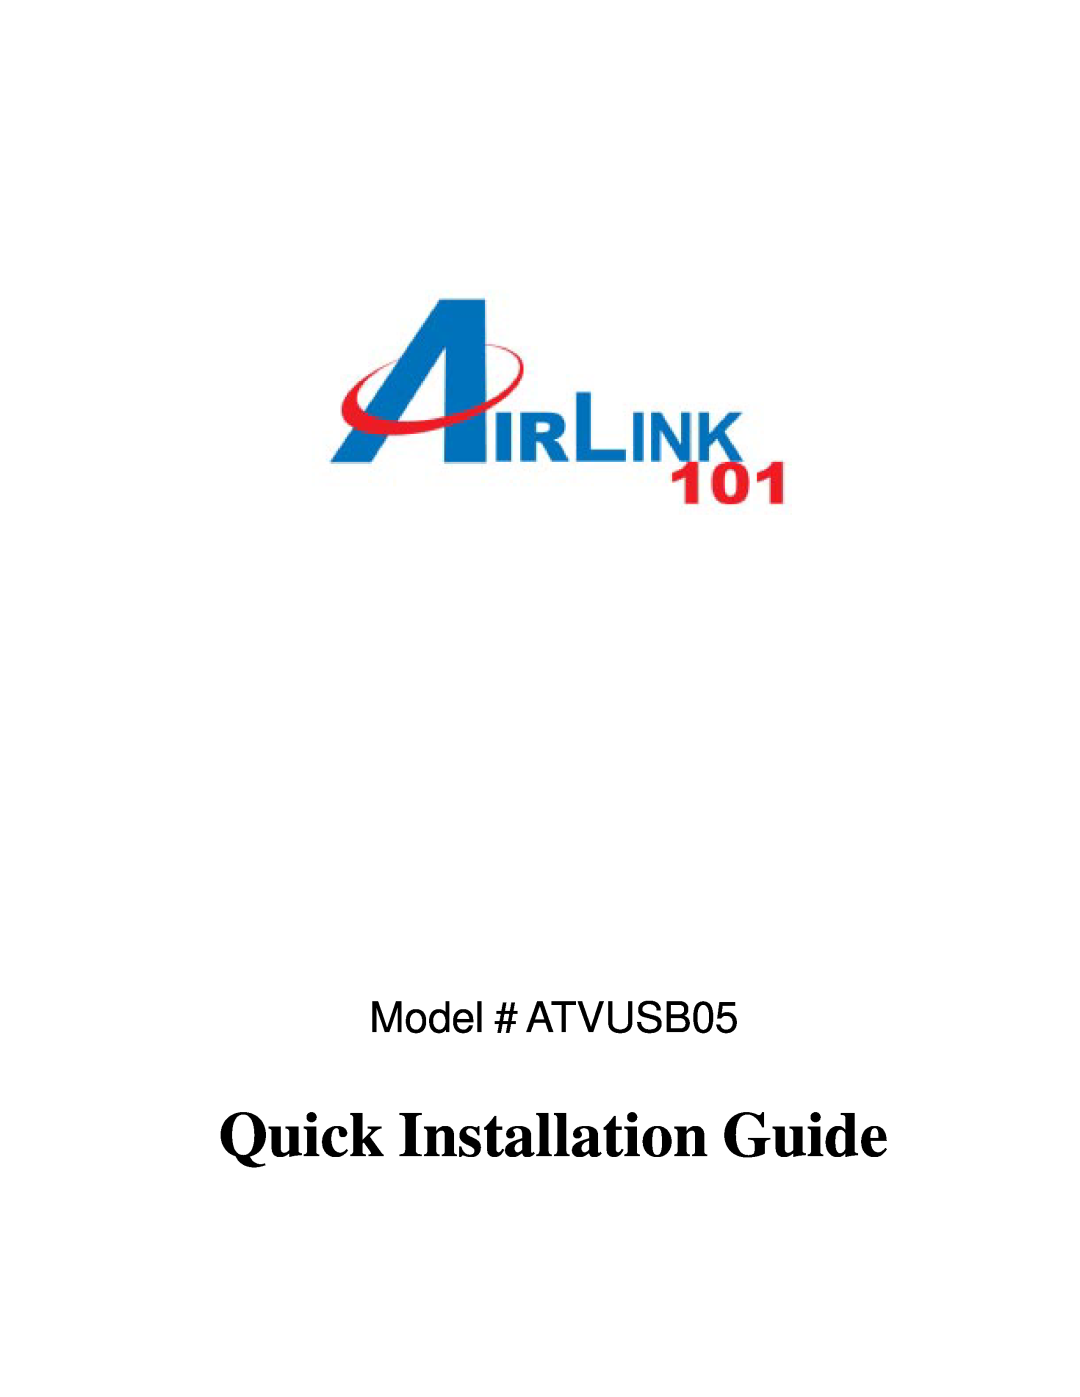 Airlink101 manual Quick Installation Guide, Model # ATVUSB05 